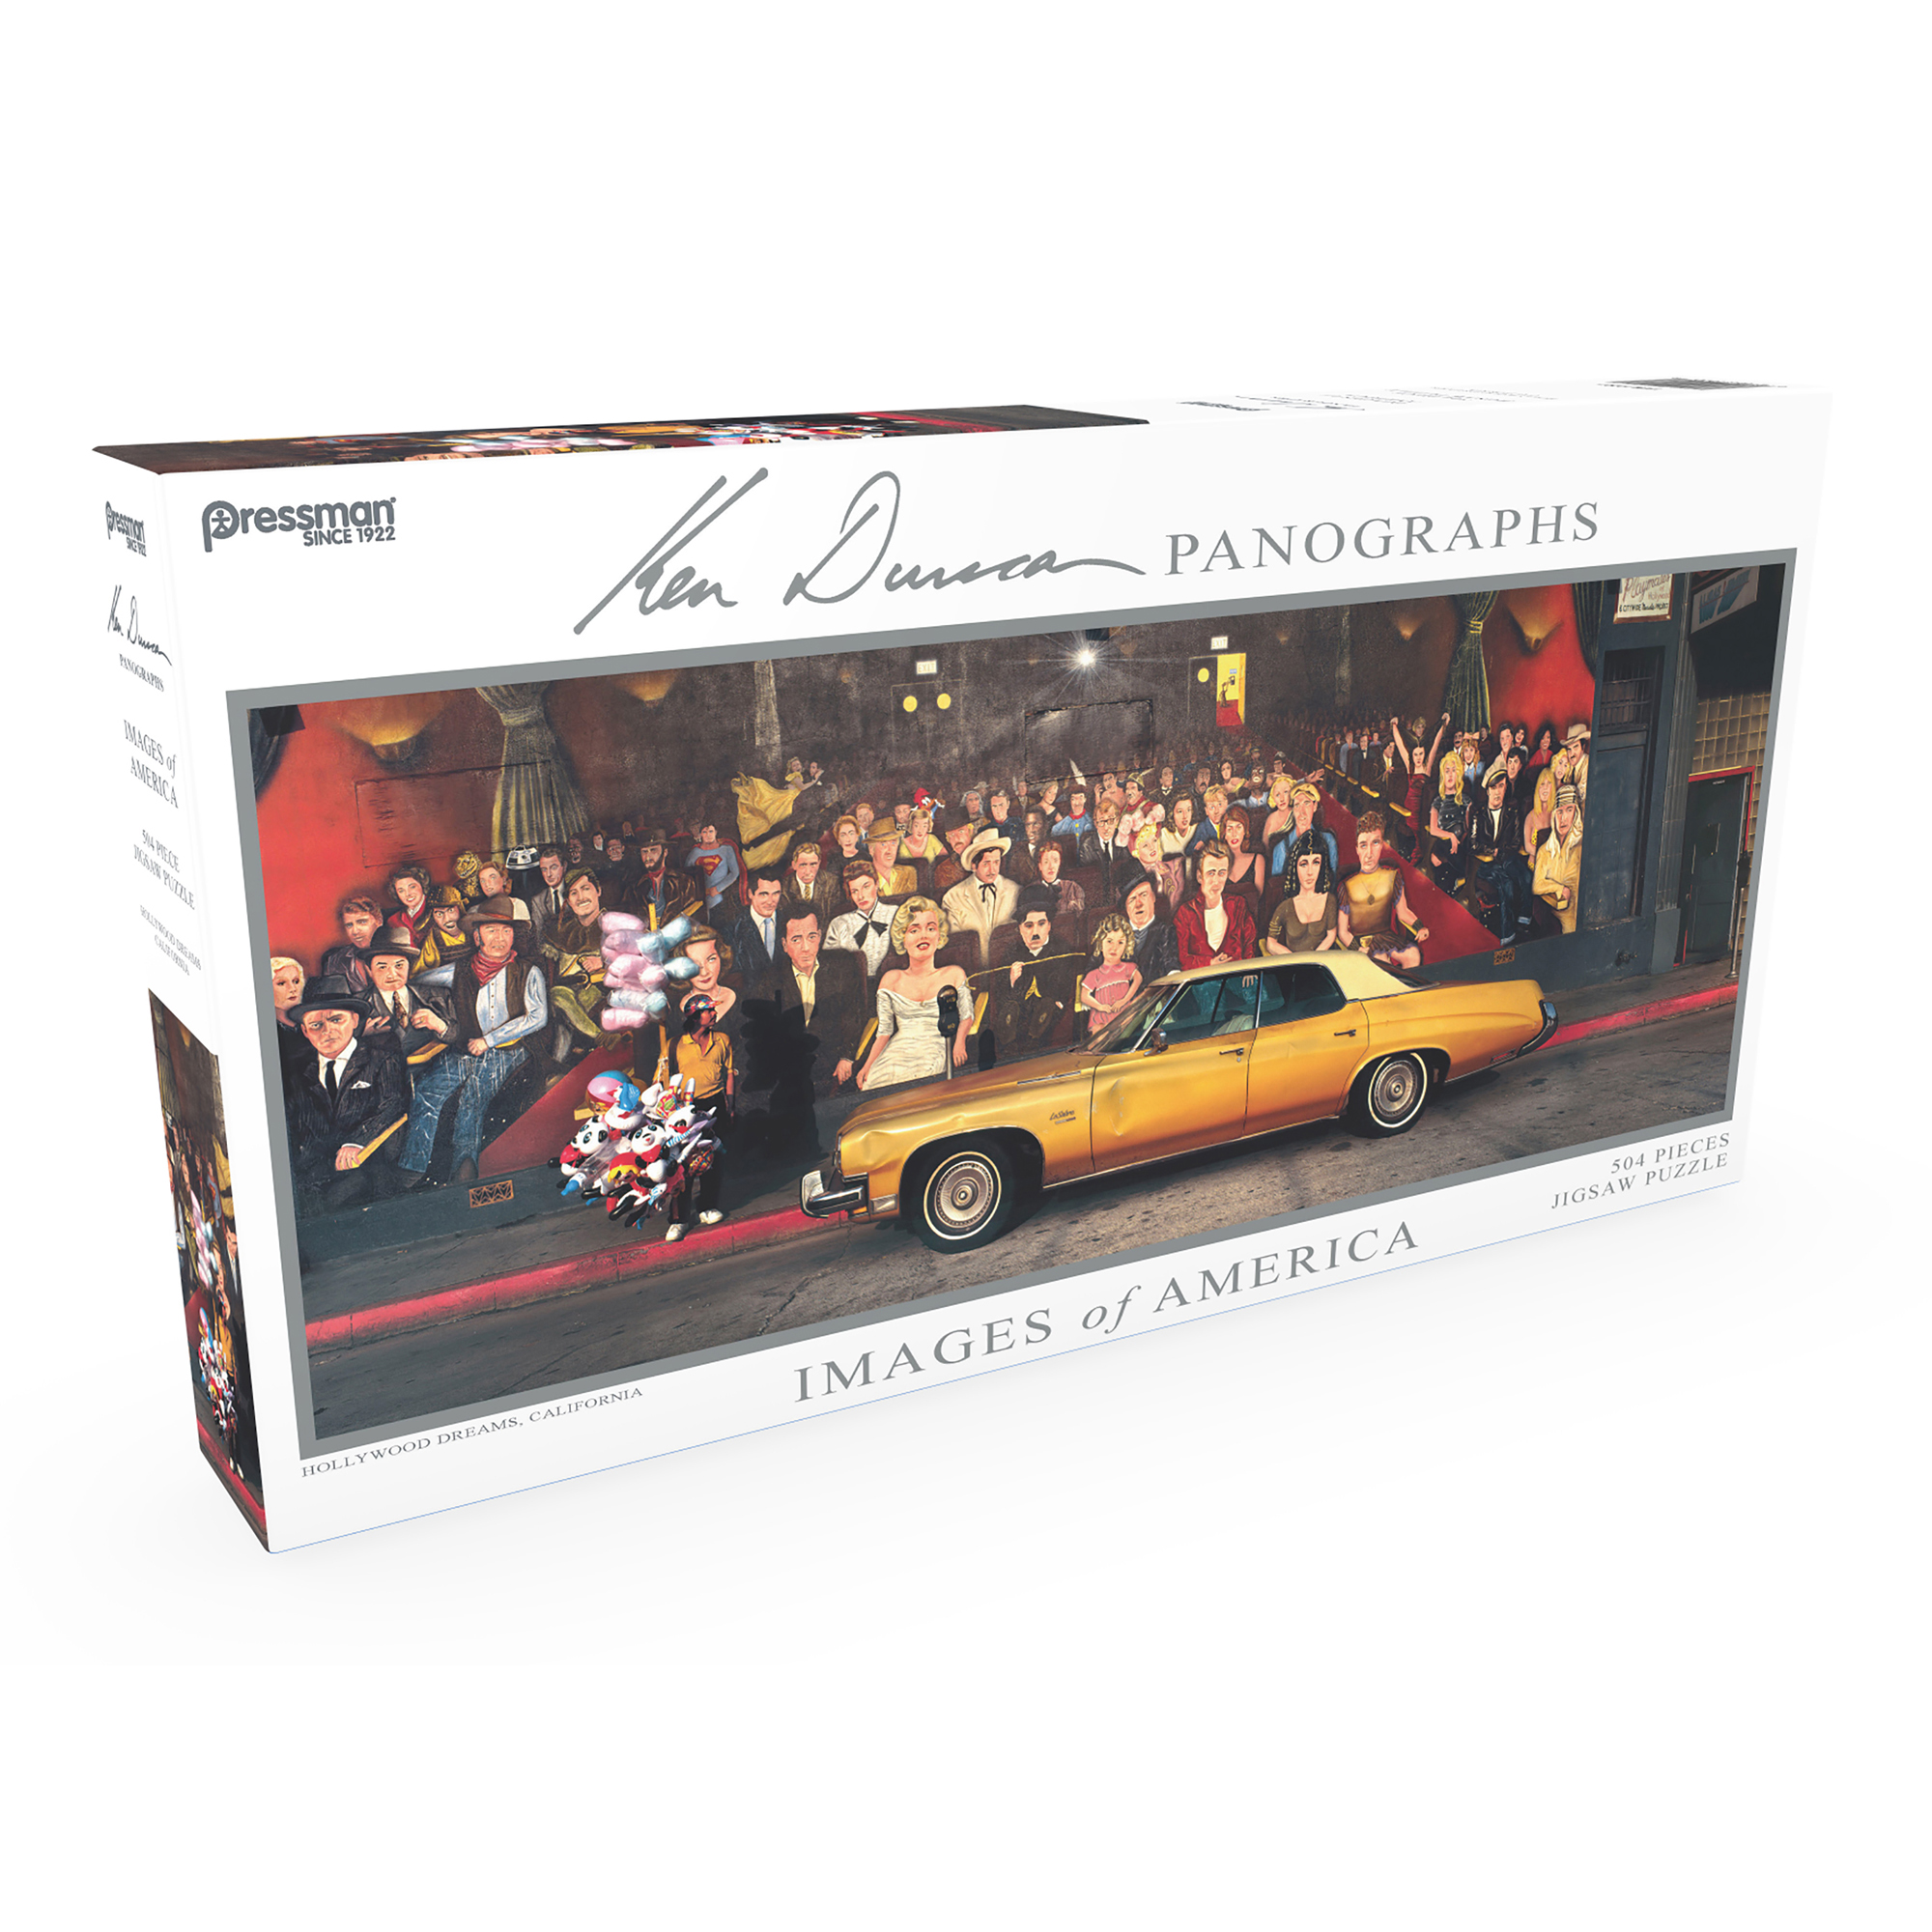 Pressman Toy Images of America 504 Piece Panoramic Puzzle, Hollywood Dreams